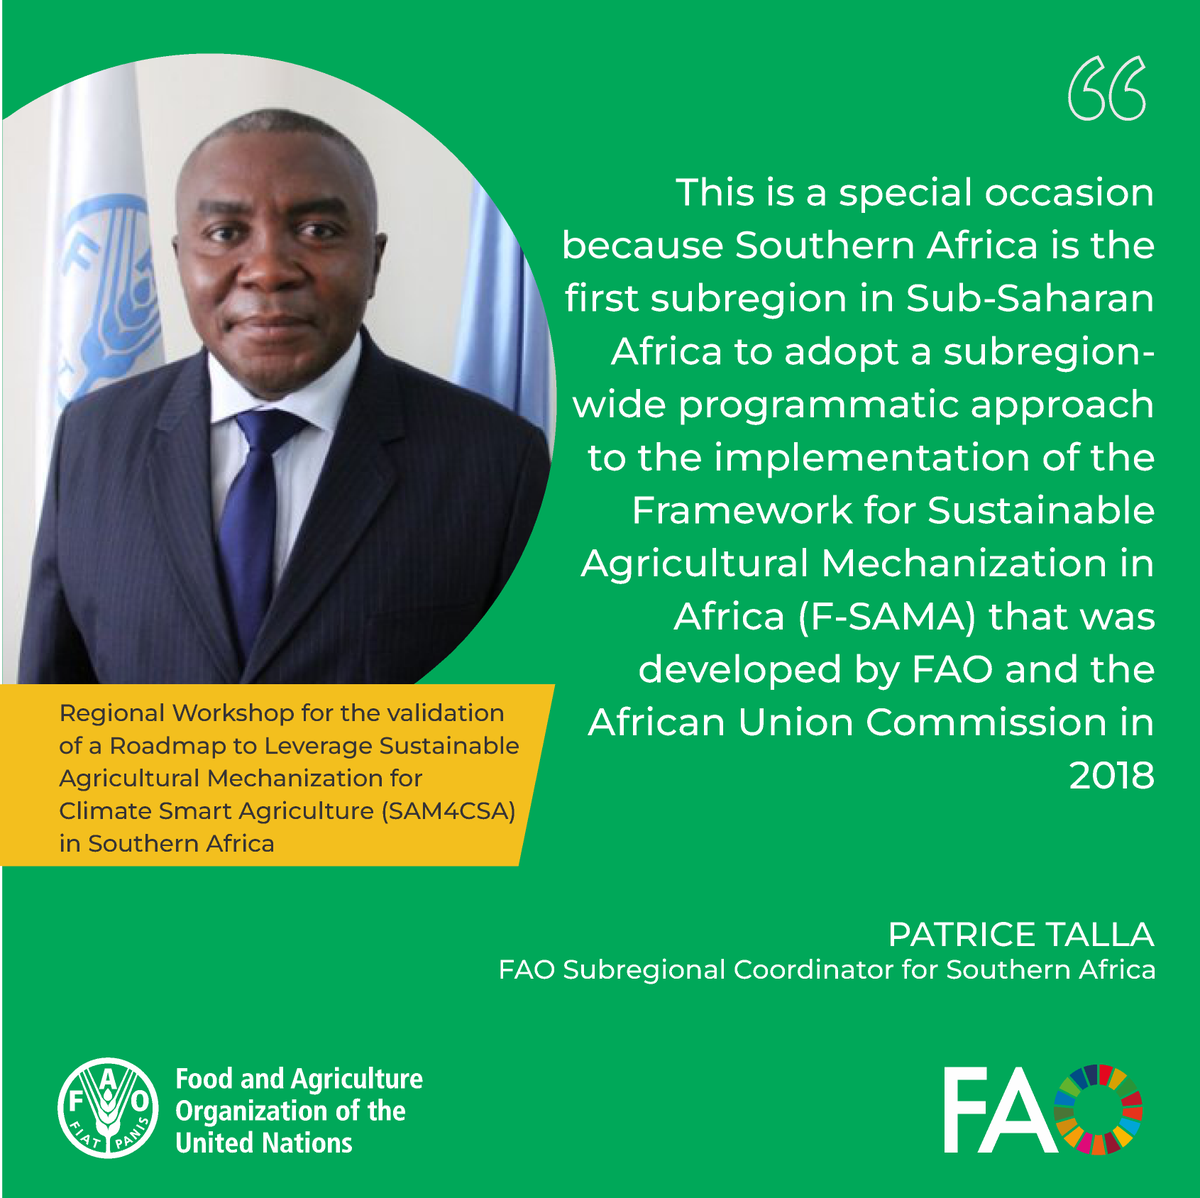 FAO in Southern Africa becomes the first region in #Africa to adopt a subregion-wide programmatic approach to the Framework for Sustainable Agricultural Mechanization in Africa (F-SAMA), @FAO's Patrice Talla @PatriceTalla tells Validation Workshop Participants. 

#ZeroHunger